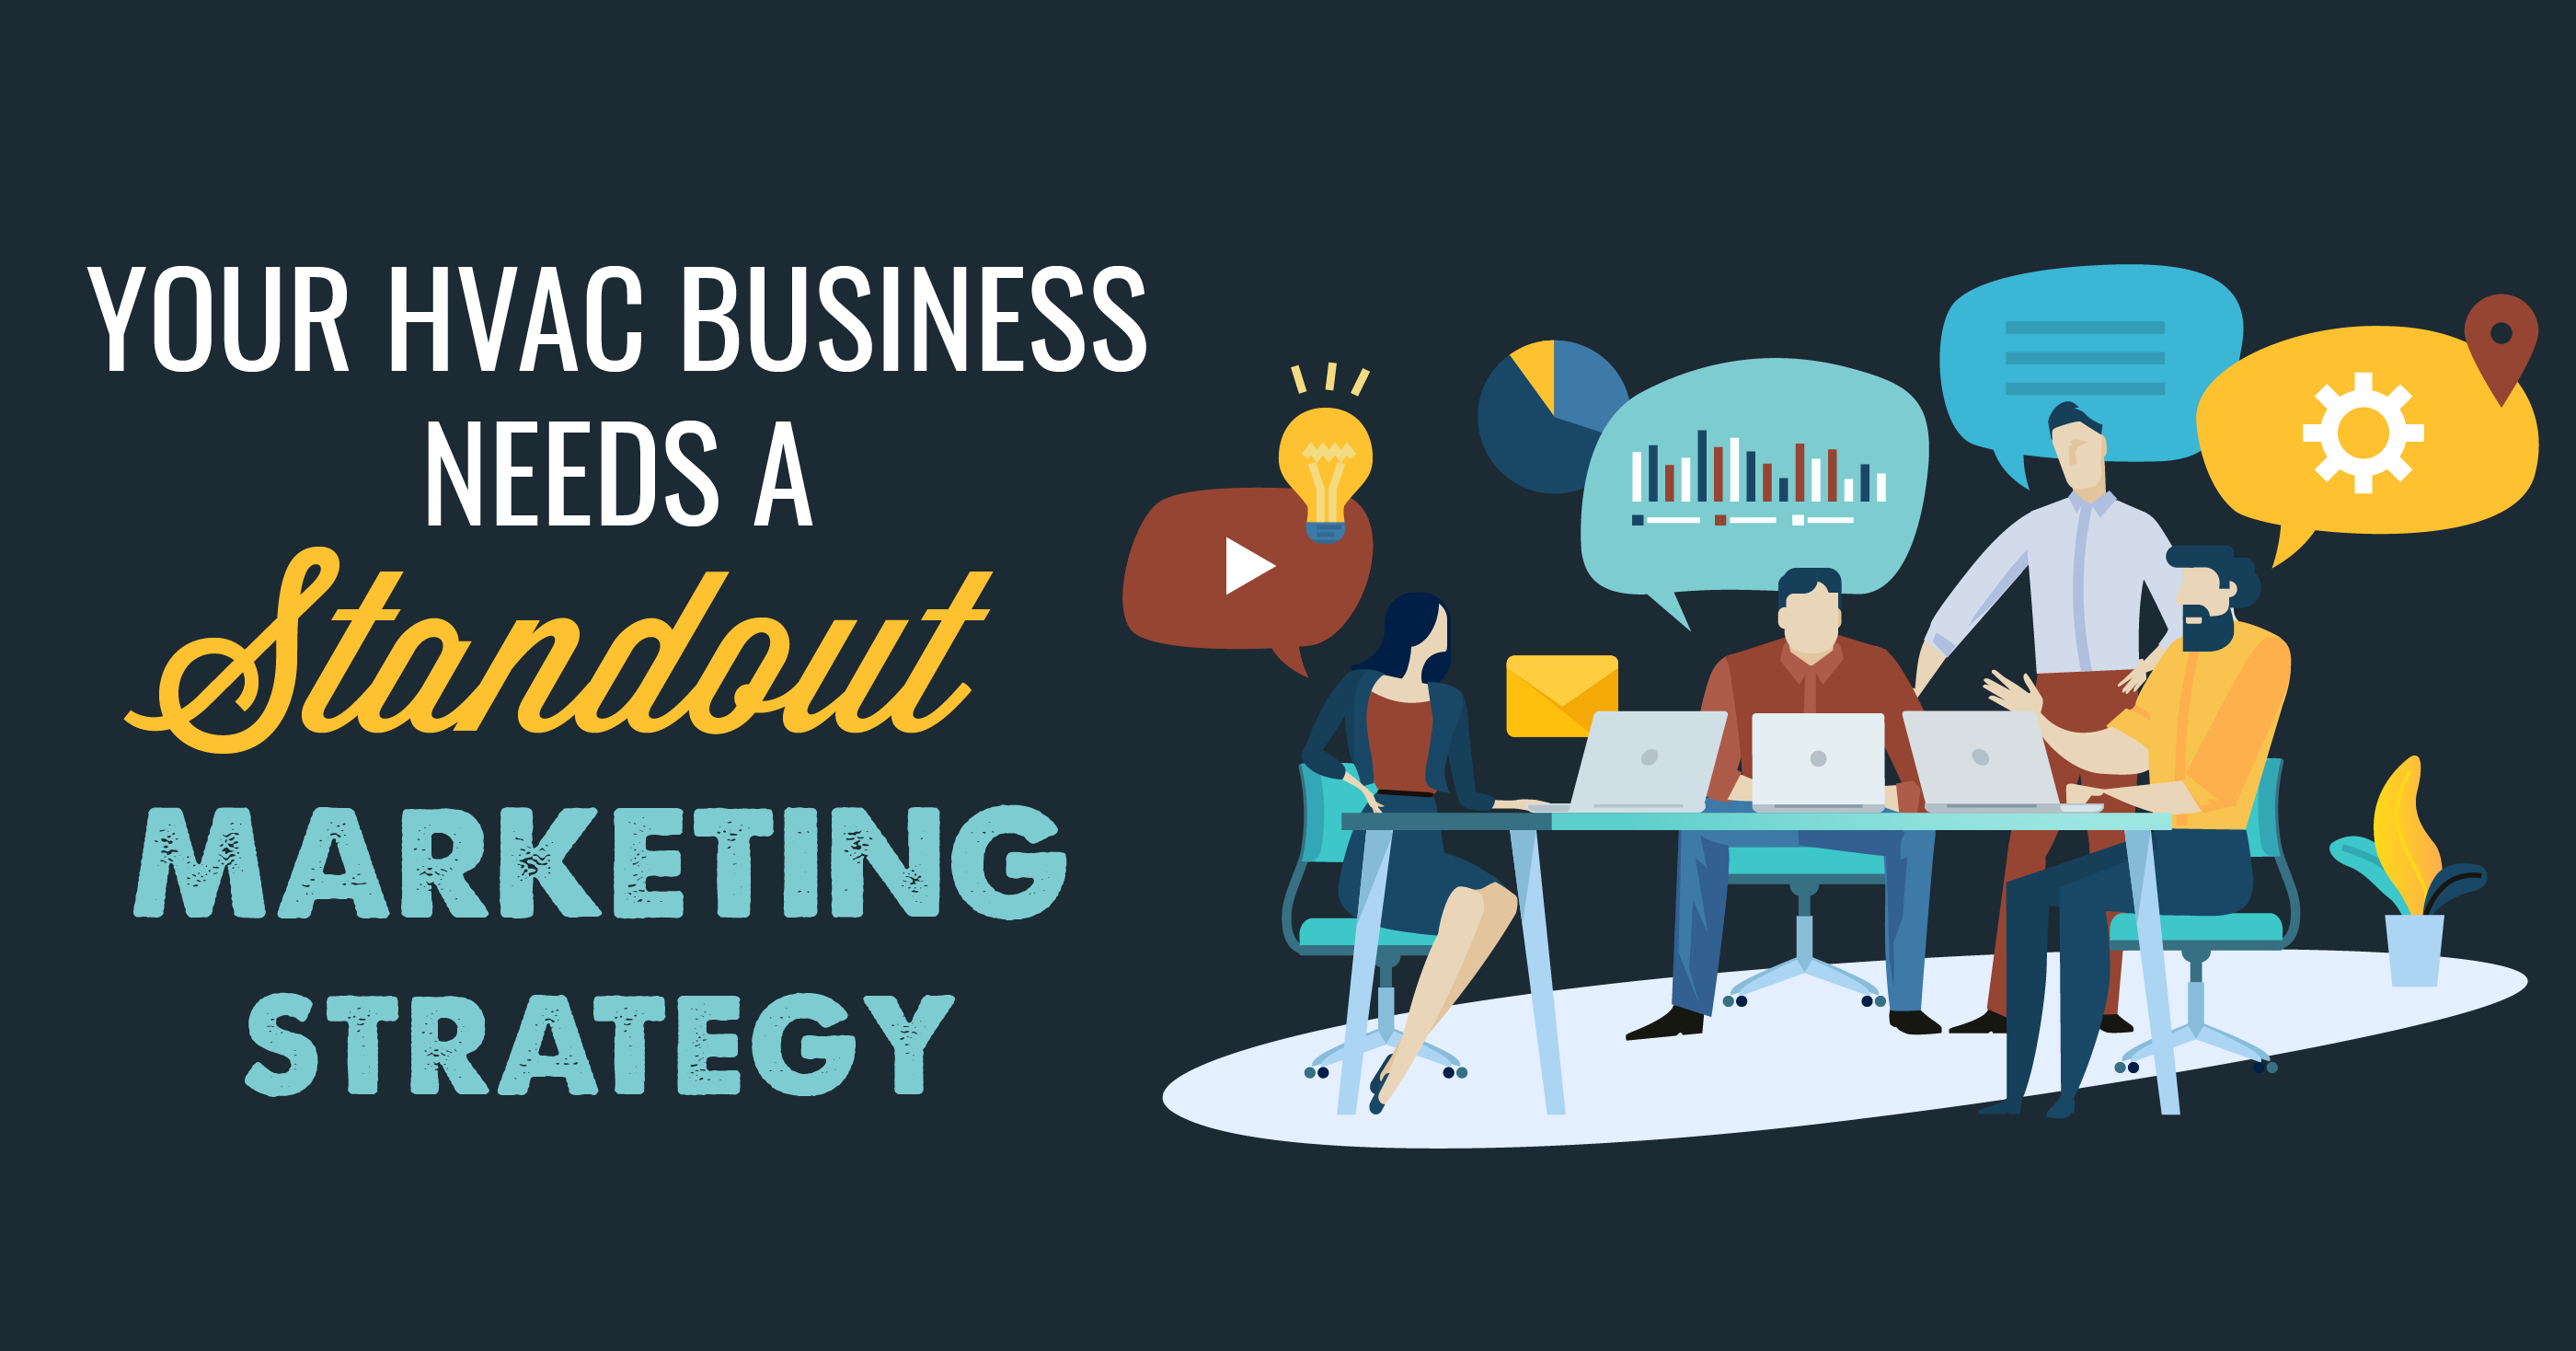 Your HVAC Business Needs a Standout Marketing Strategy